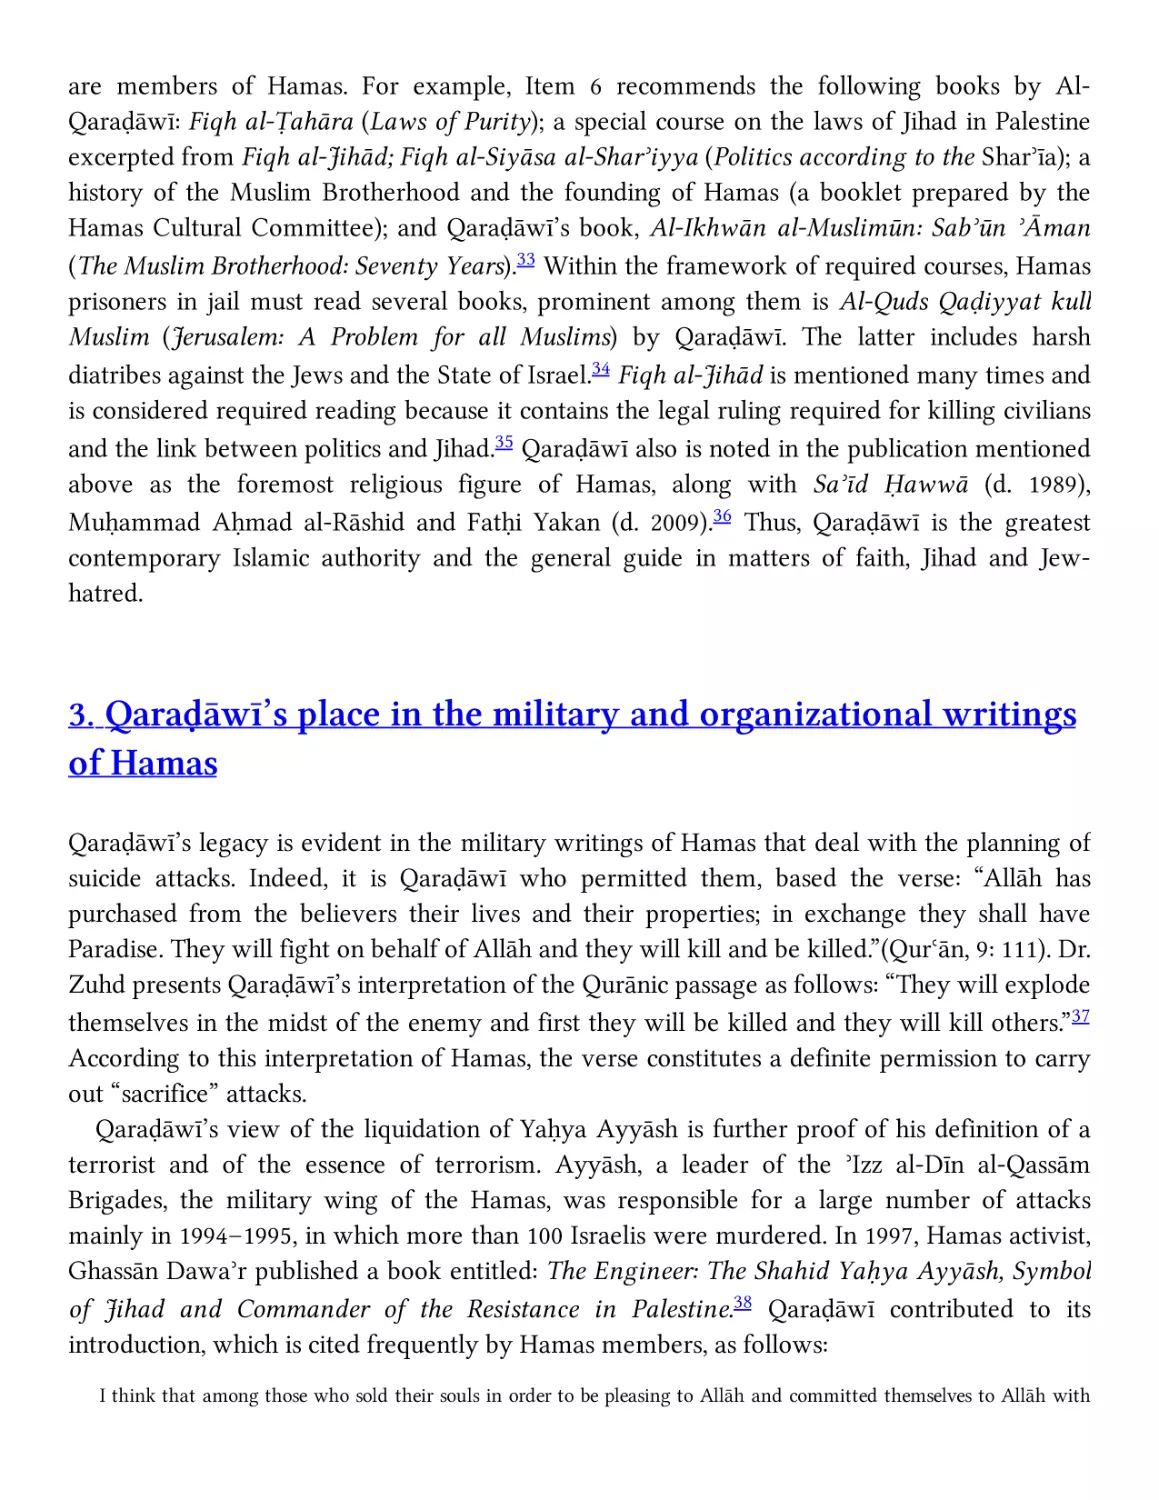 3. QaraḊāwī’s place in the military and organizational writings of Hamas